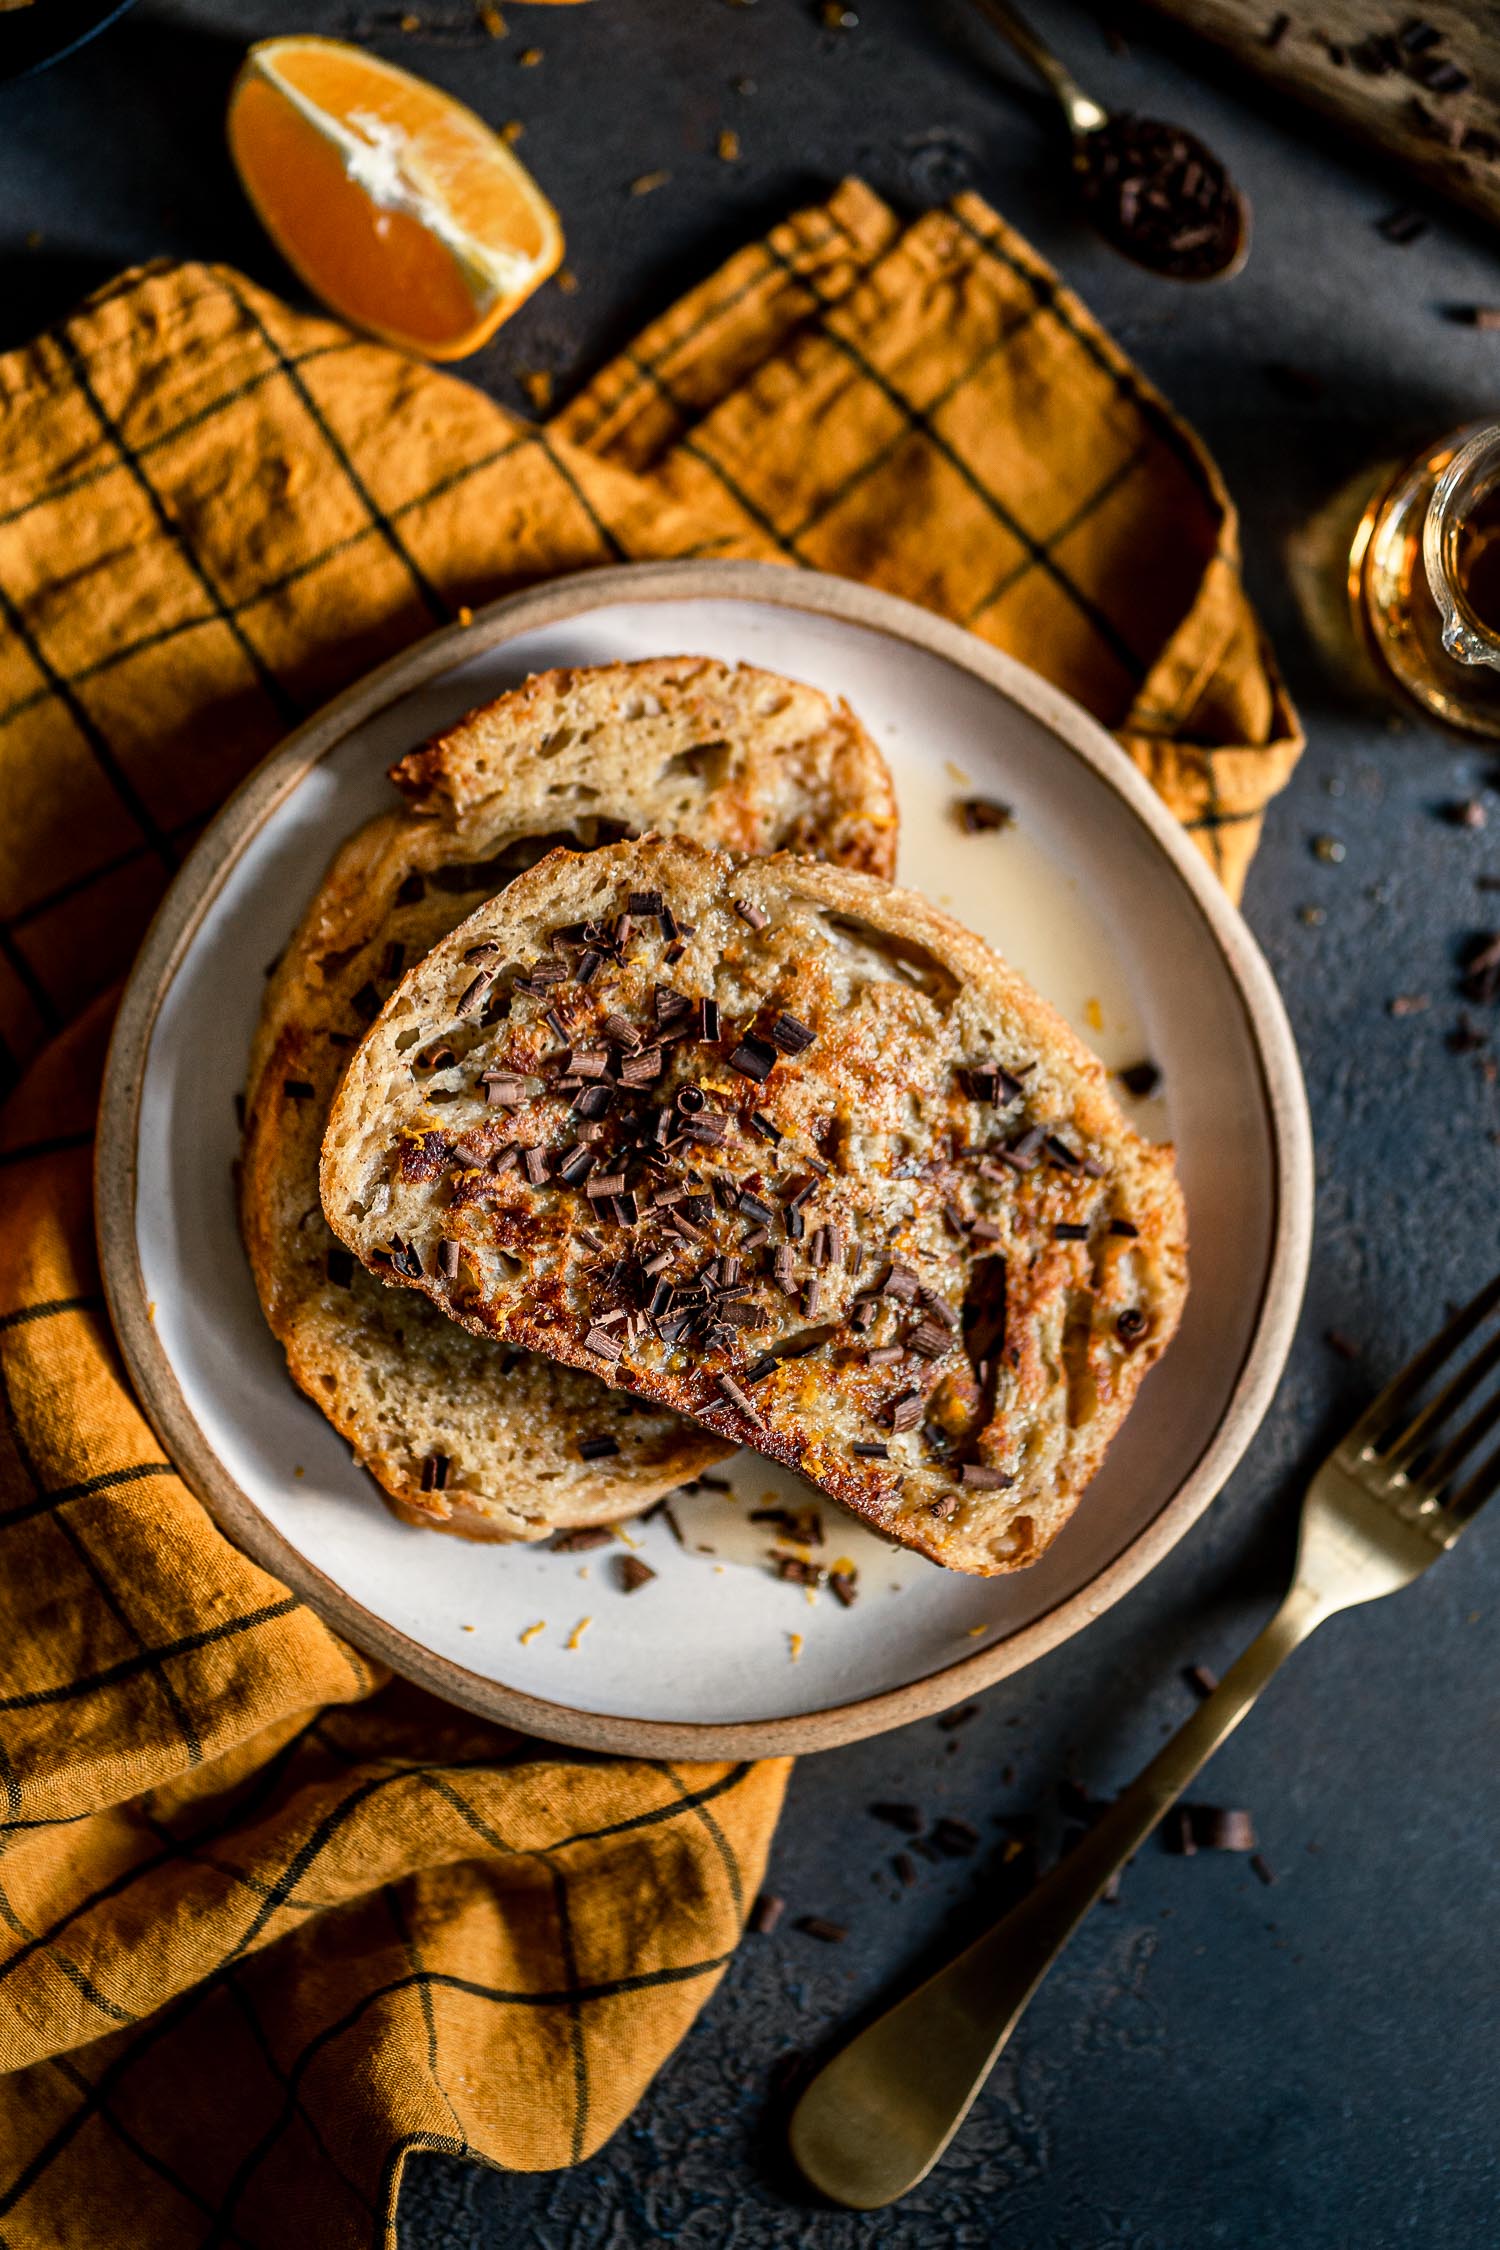 Murielle Banackissa - Food 52 - Grand Marnier French Toast